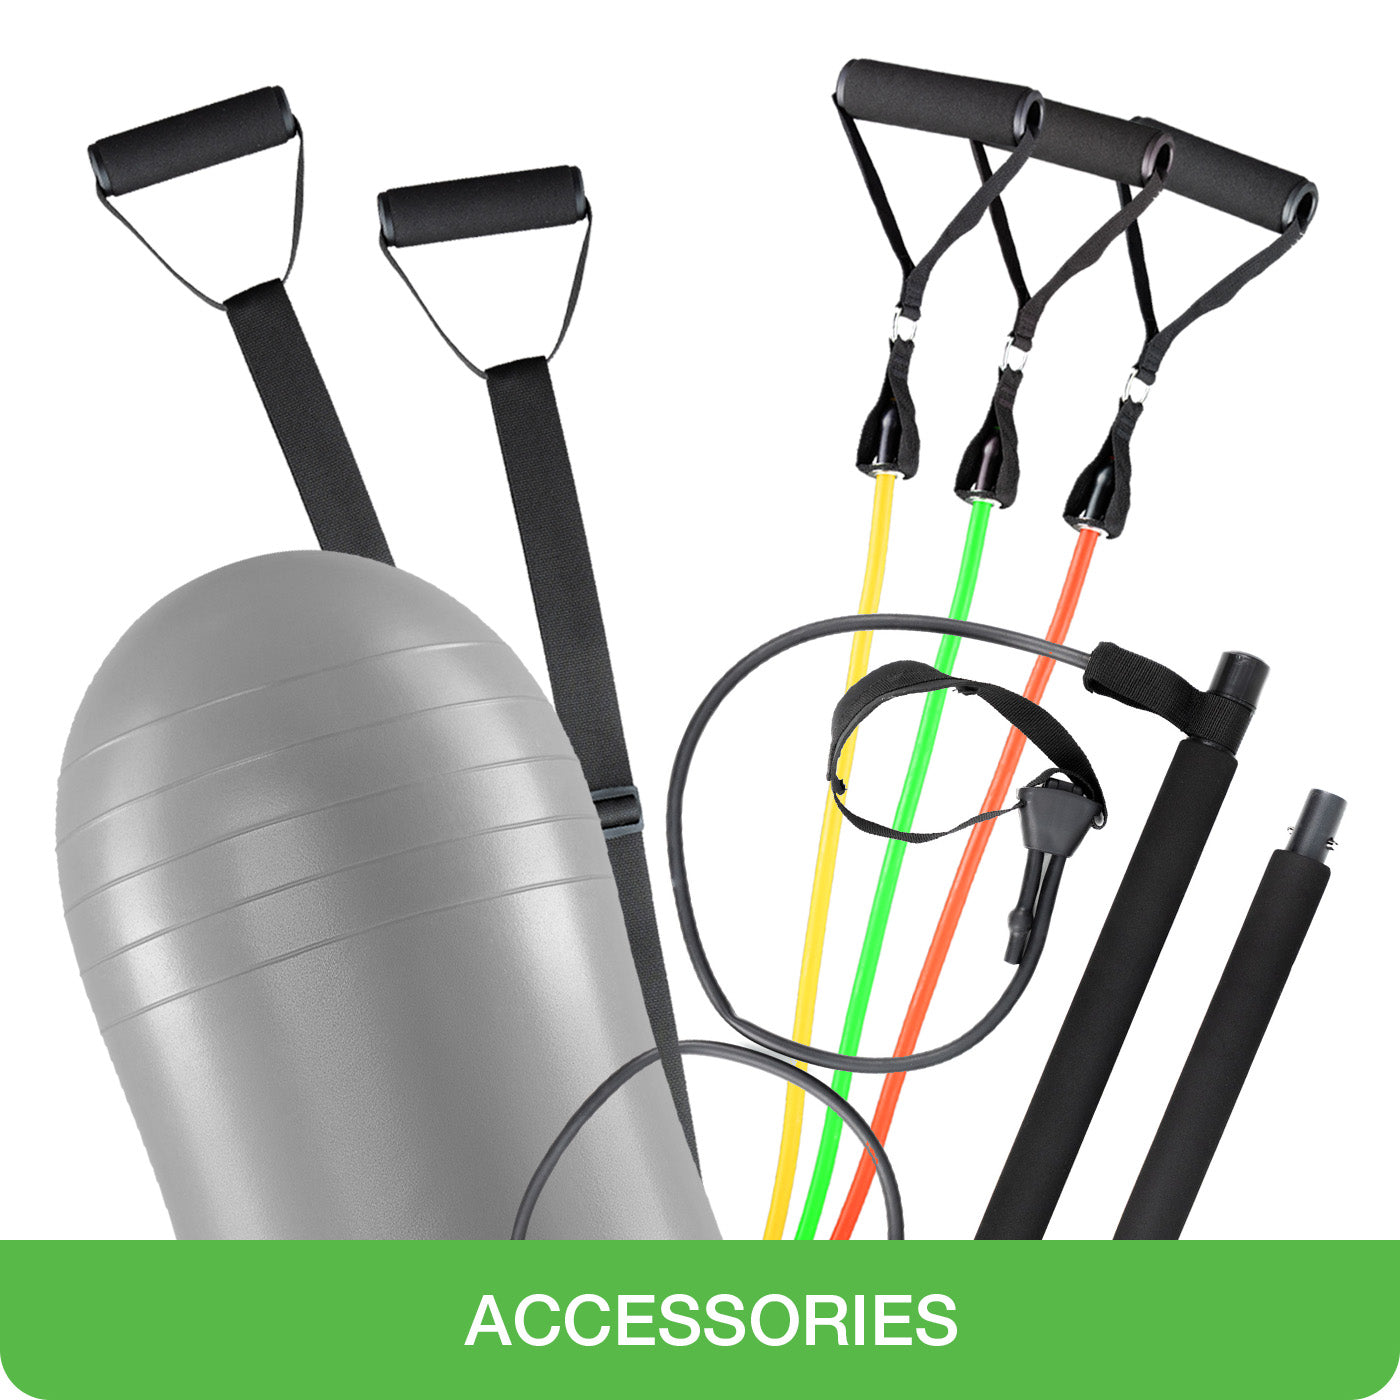 accessories for vibrating plate: yoga ball, resistance bands, pilates bar, sling trainer